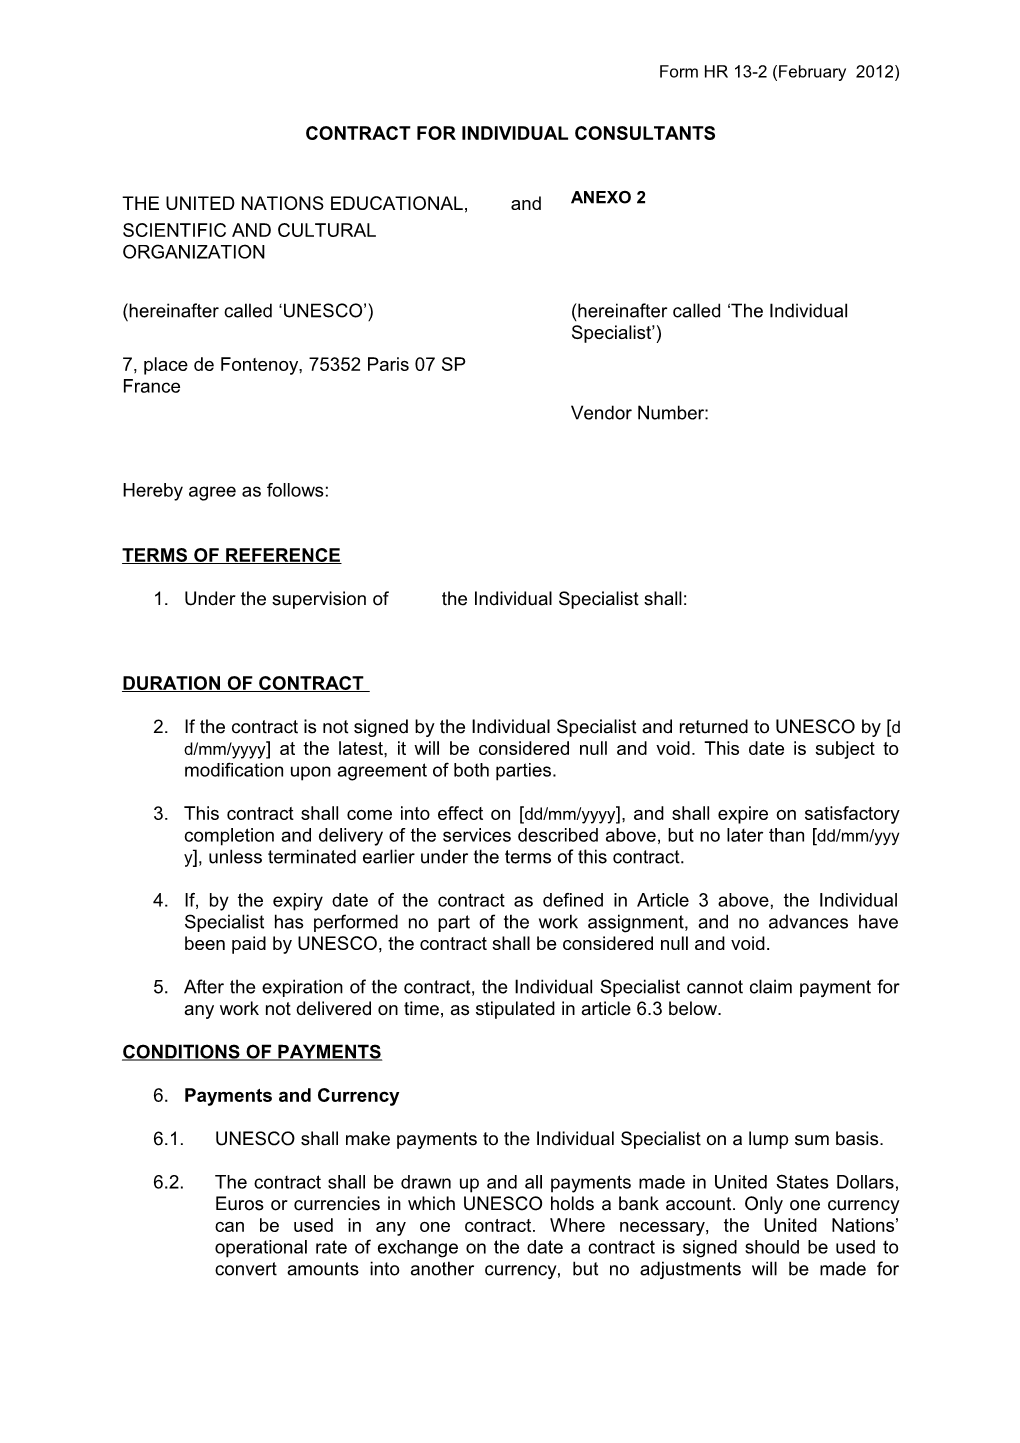 Contract for Individual Consultants